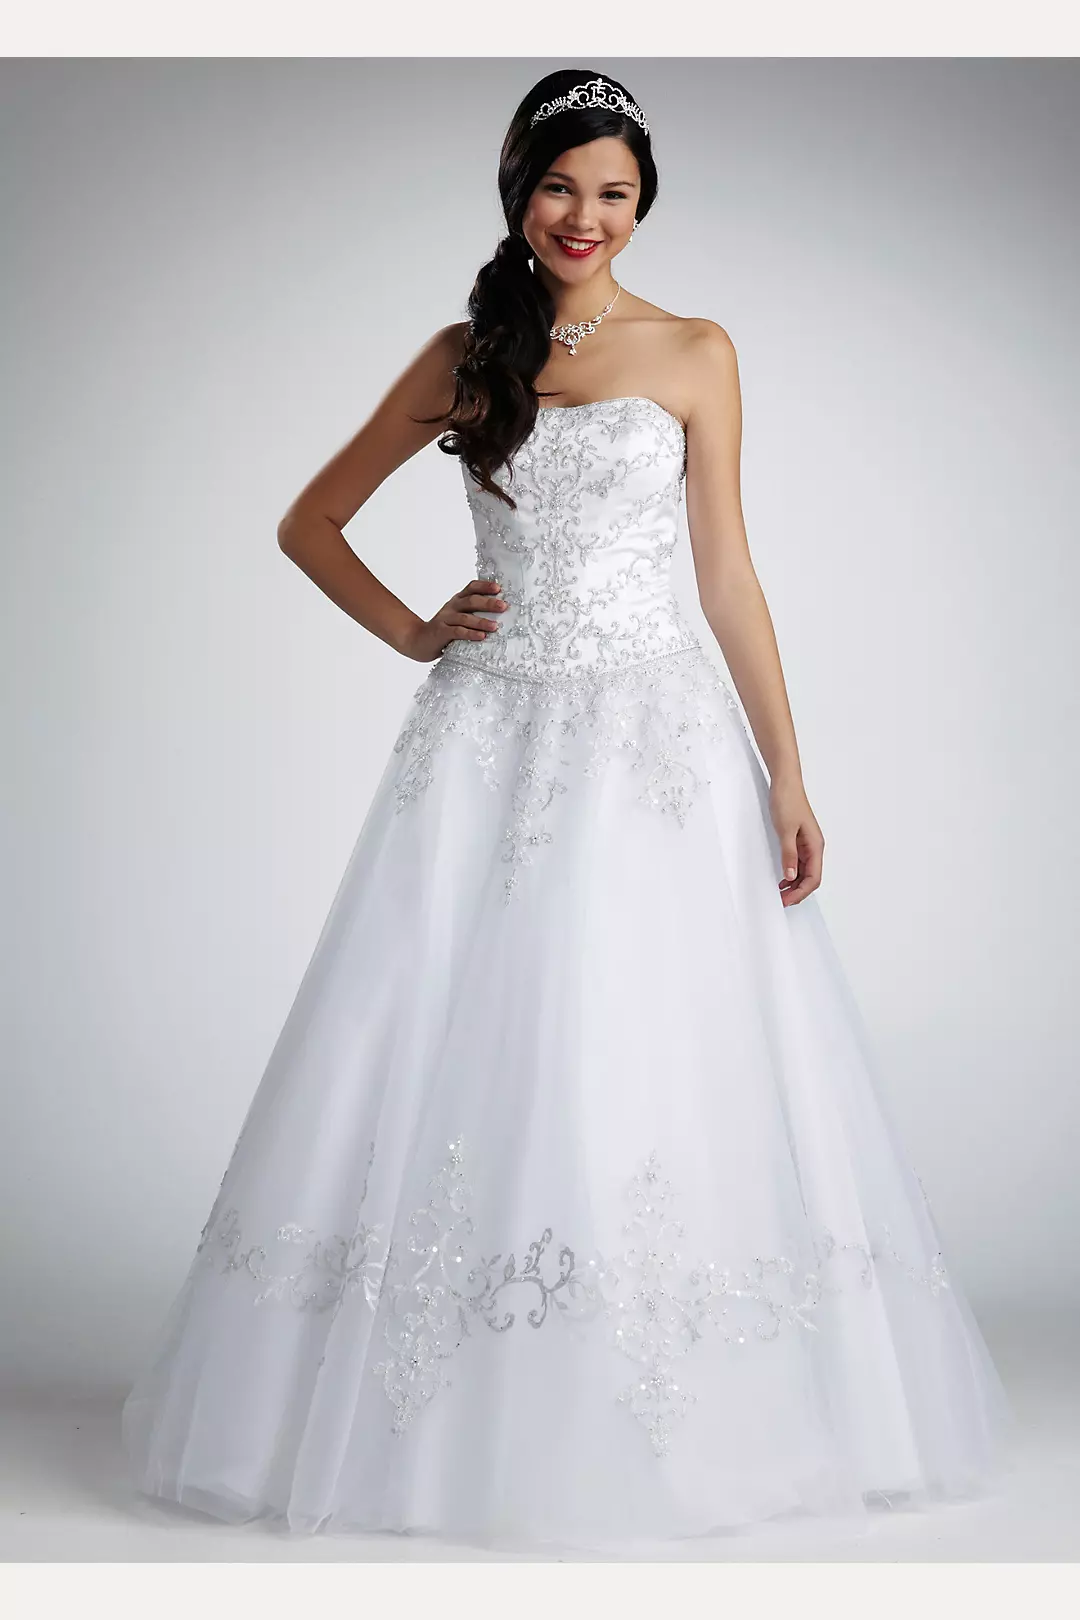 Strapless Tulle Ball Gown with Satin Bodice Image